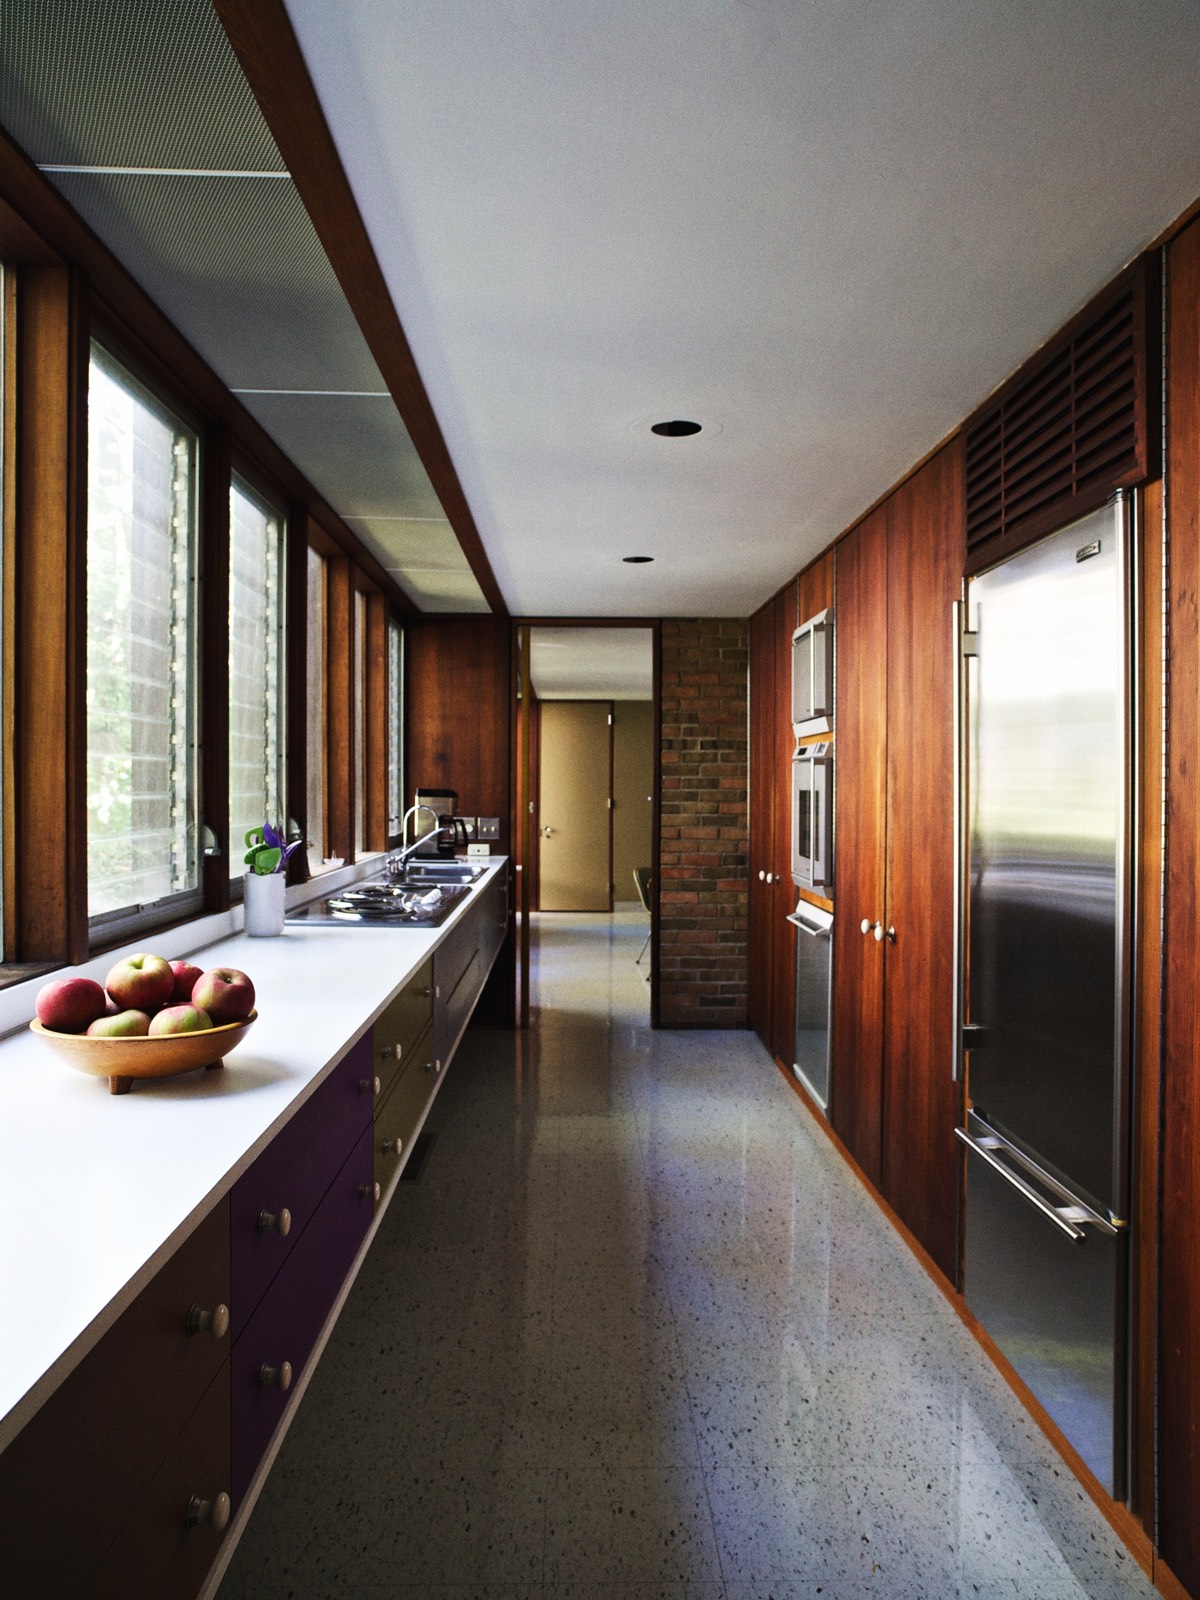 The galley-style kitchen cabinets are all original and were repainted to match Nelson's specifications using the Container Corporation's Color Harmony Manual.